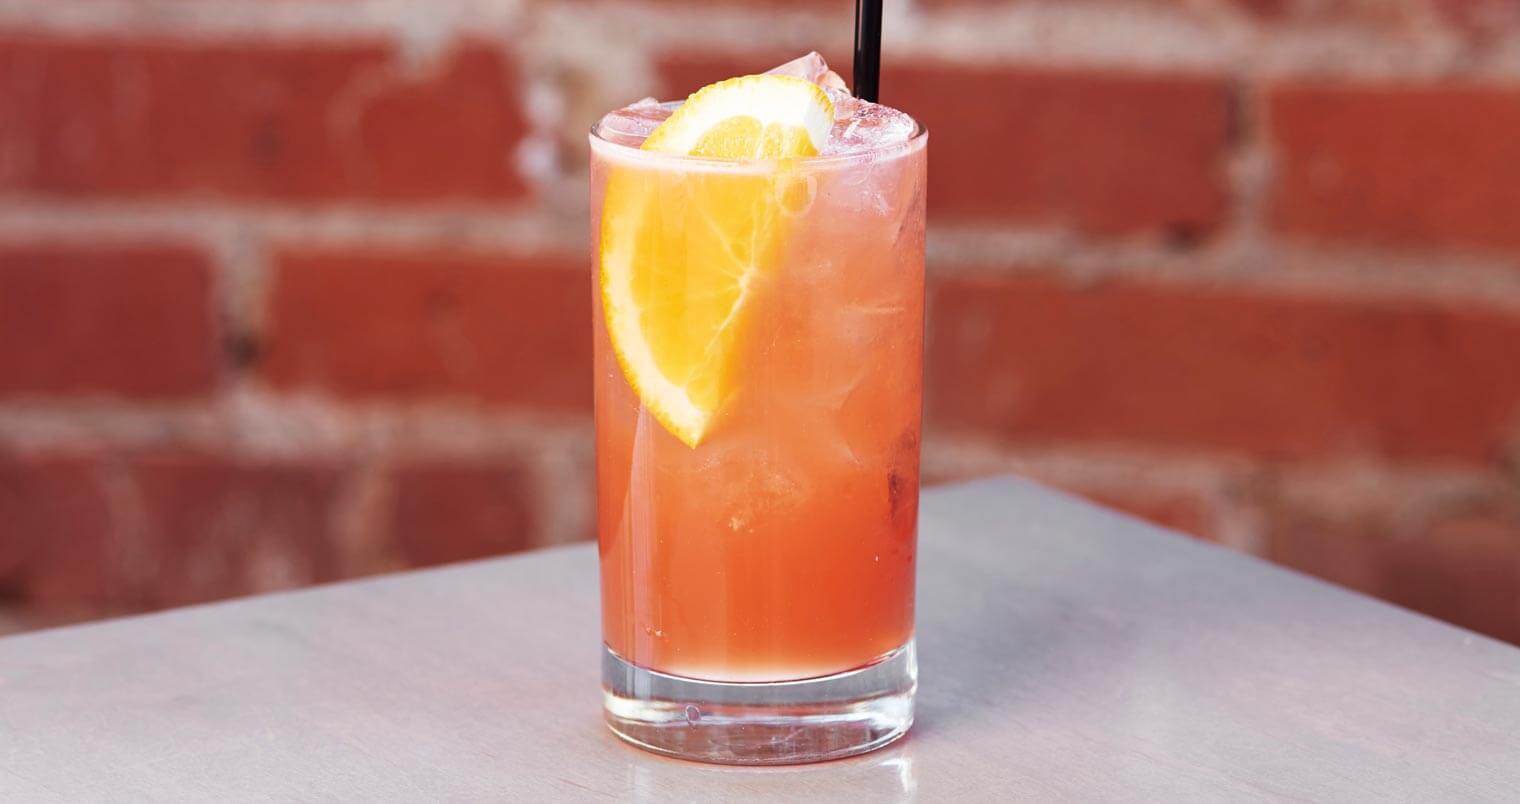 #1 Crush, cocktail with garnish, brick wall, featured image